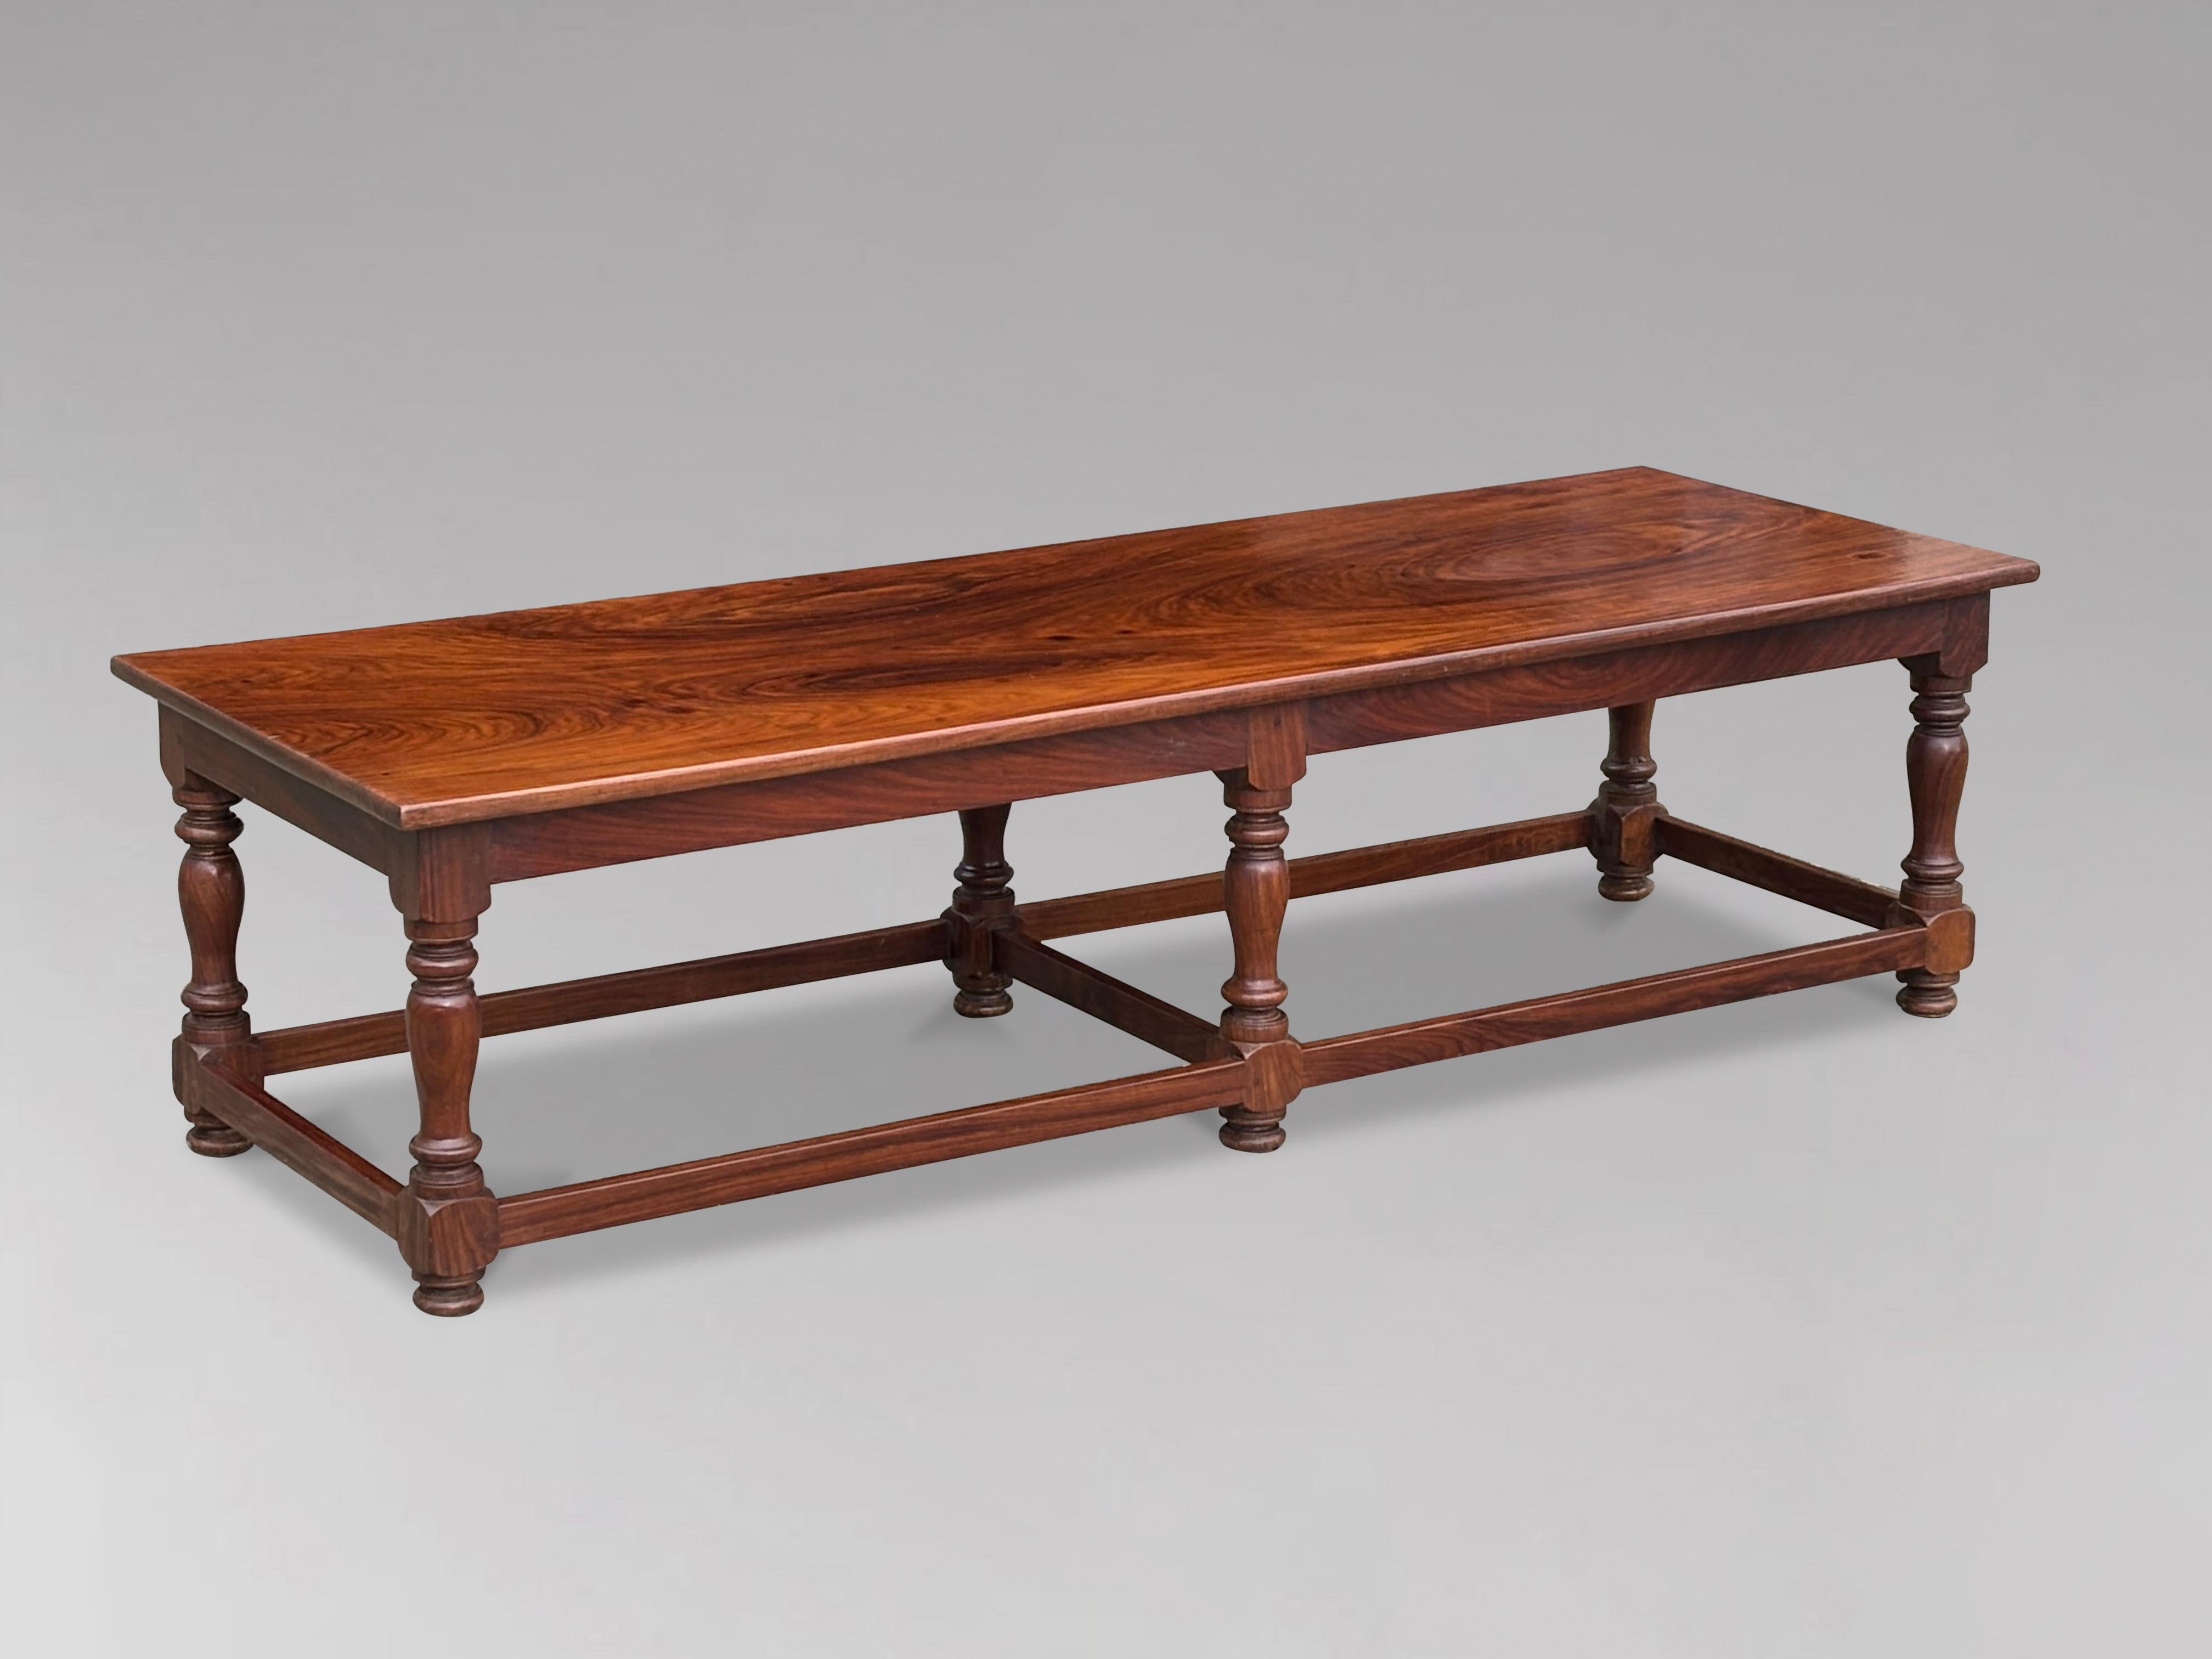 A wonderful early 20th century solid polished teak coffee table, at 2 meters long. Rectangular well figured polished teak top, above 6 turned legs connected by stretchers. Dating from the early 1900s. Very good quality, amazing patina and colour,